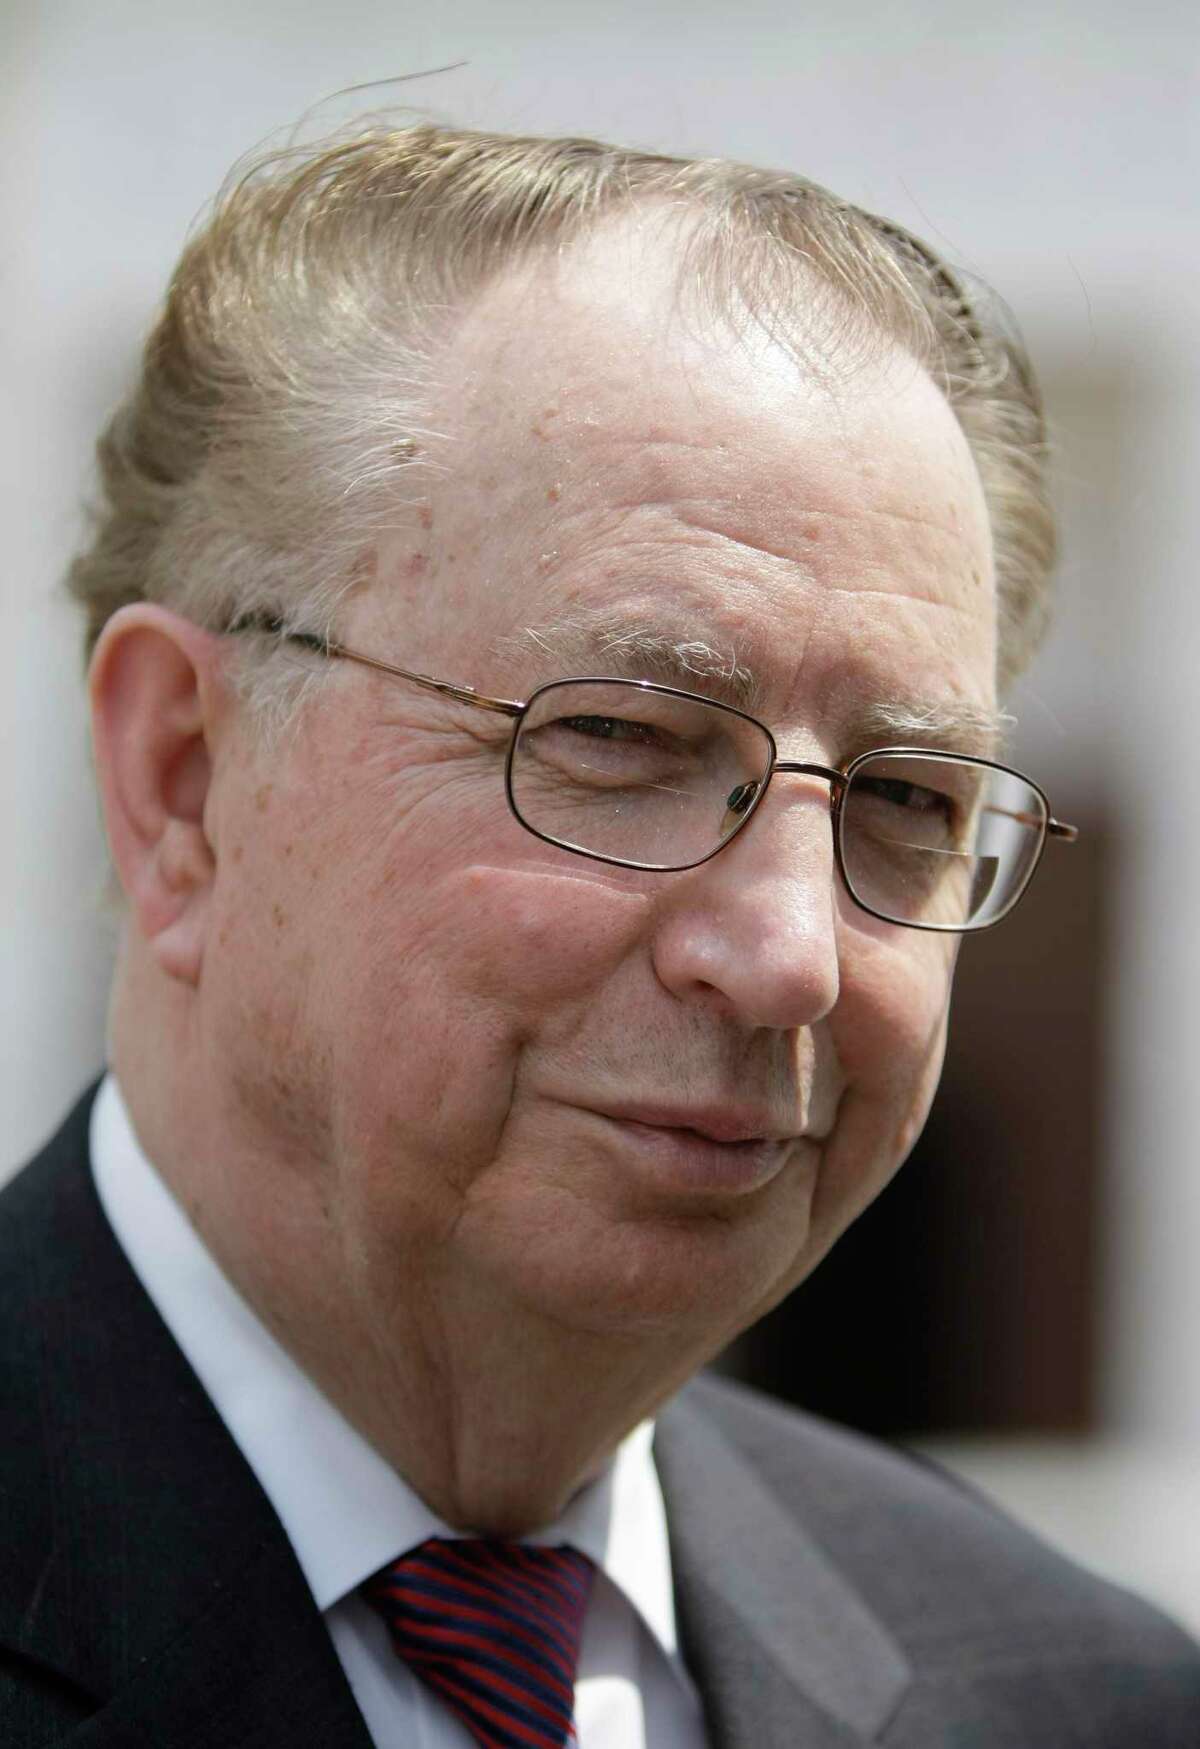 Kenneth Mattox, Professor of Surgery at Baylor College of Medicine, shown during the memorial service for Dr. Michael DeBakey, Wednesday, July 16, 2008, at the Co-Cathedral of the Sacred Heart, downtown Houston.